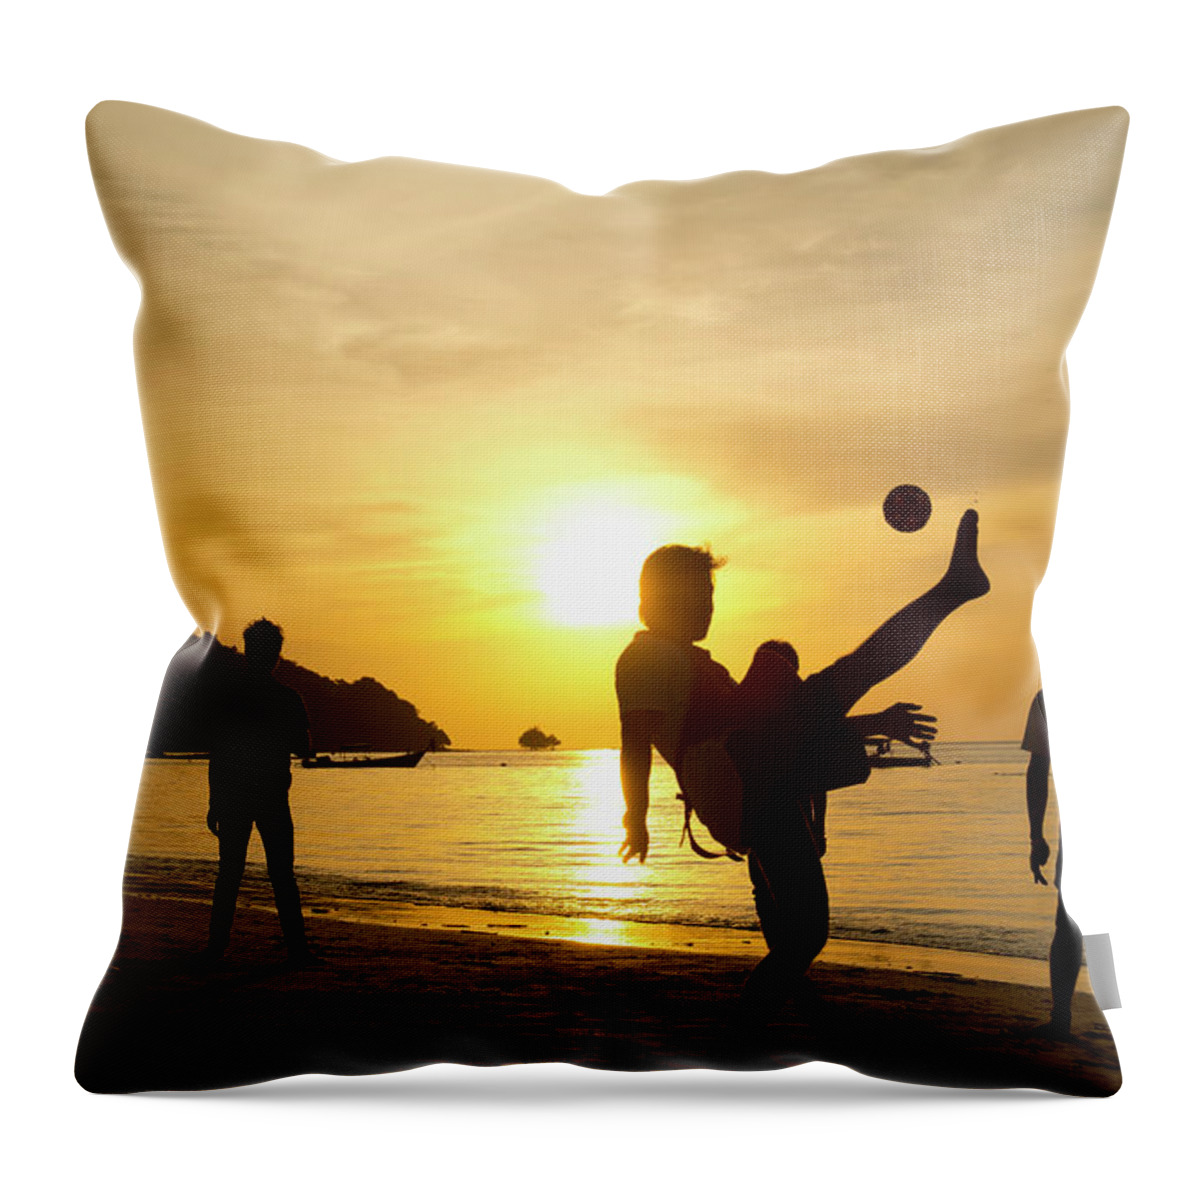 Young Men Throw Pillow featuring the photograph Men Playing Takraw Ball At Sunset On by Stuart Corlett / Design Pics